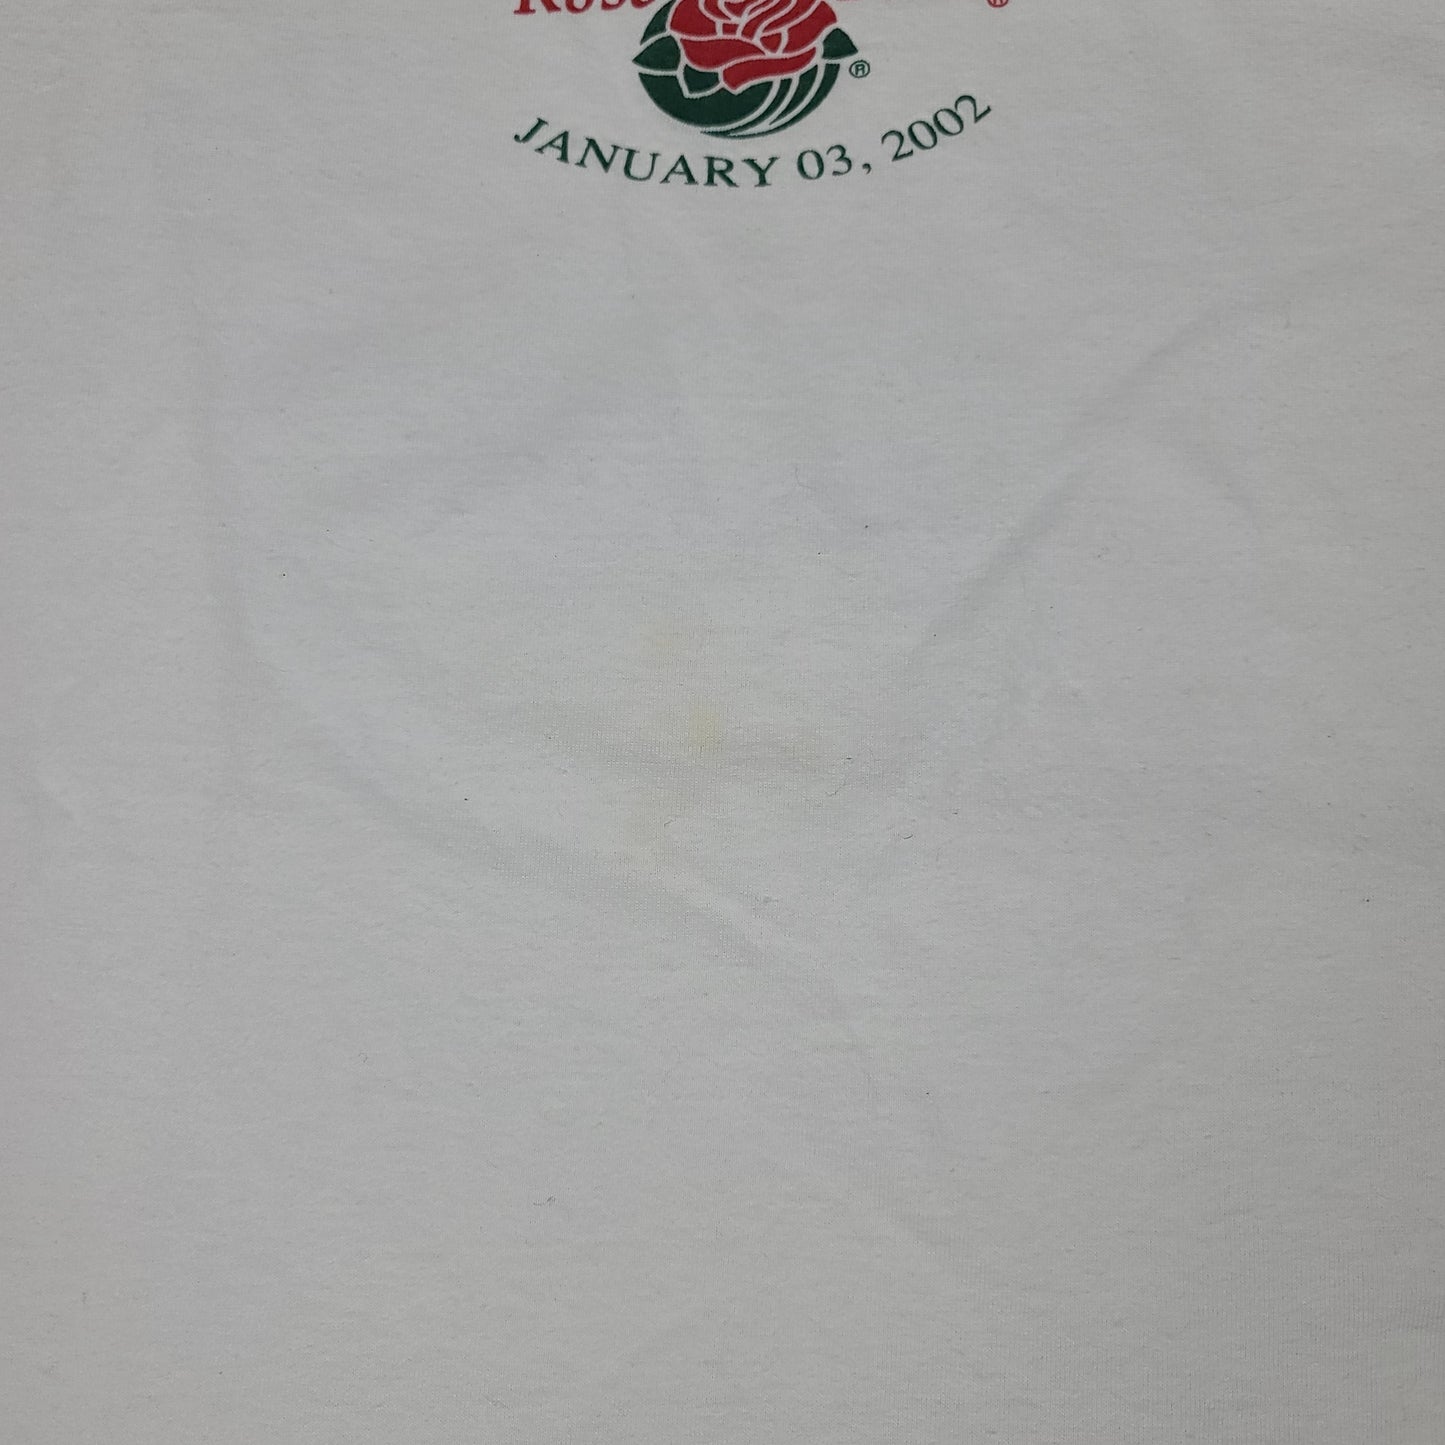 Vintage University of Miami Hurricanes Rose Bowl 2002 White Russell Athletic Long Sleeve Tee